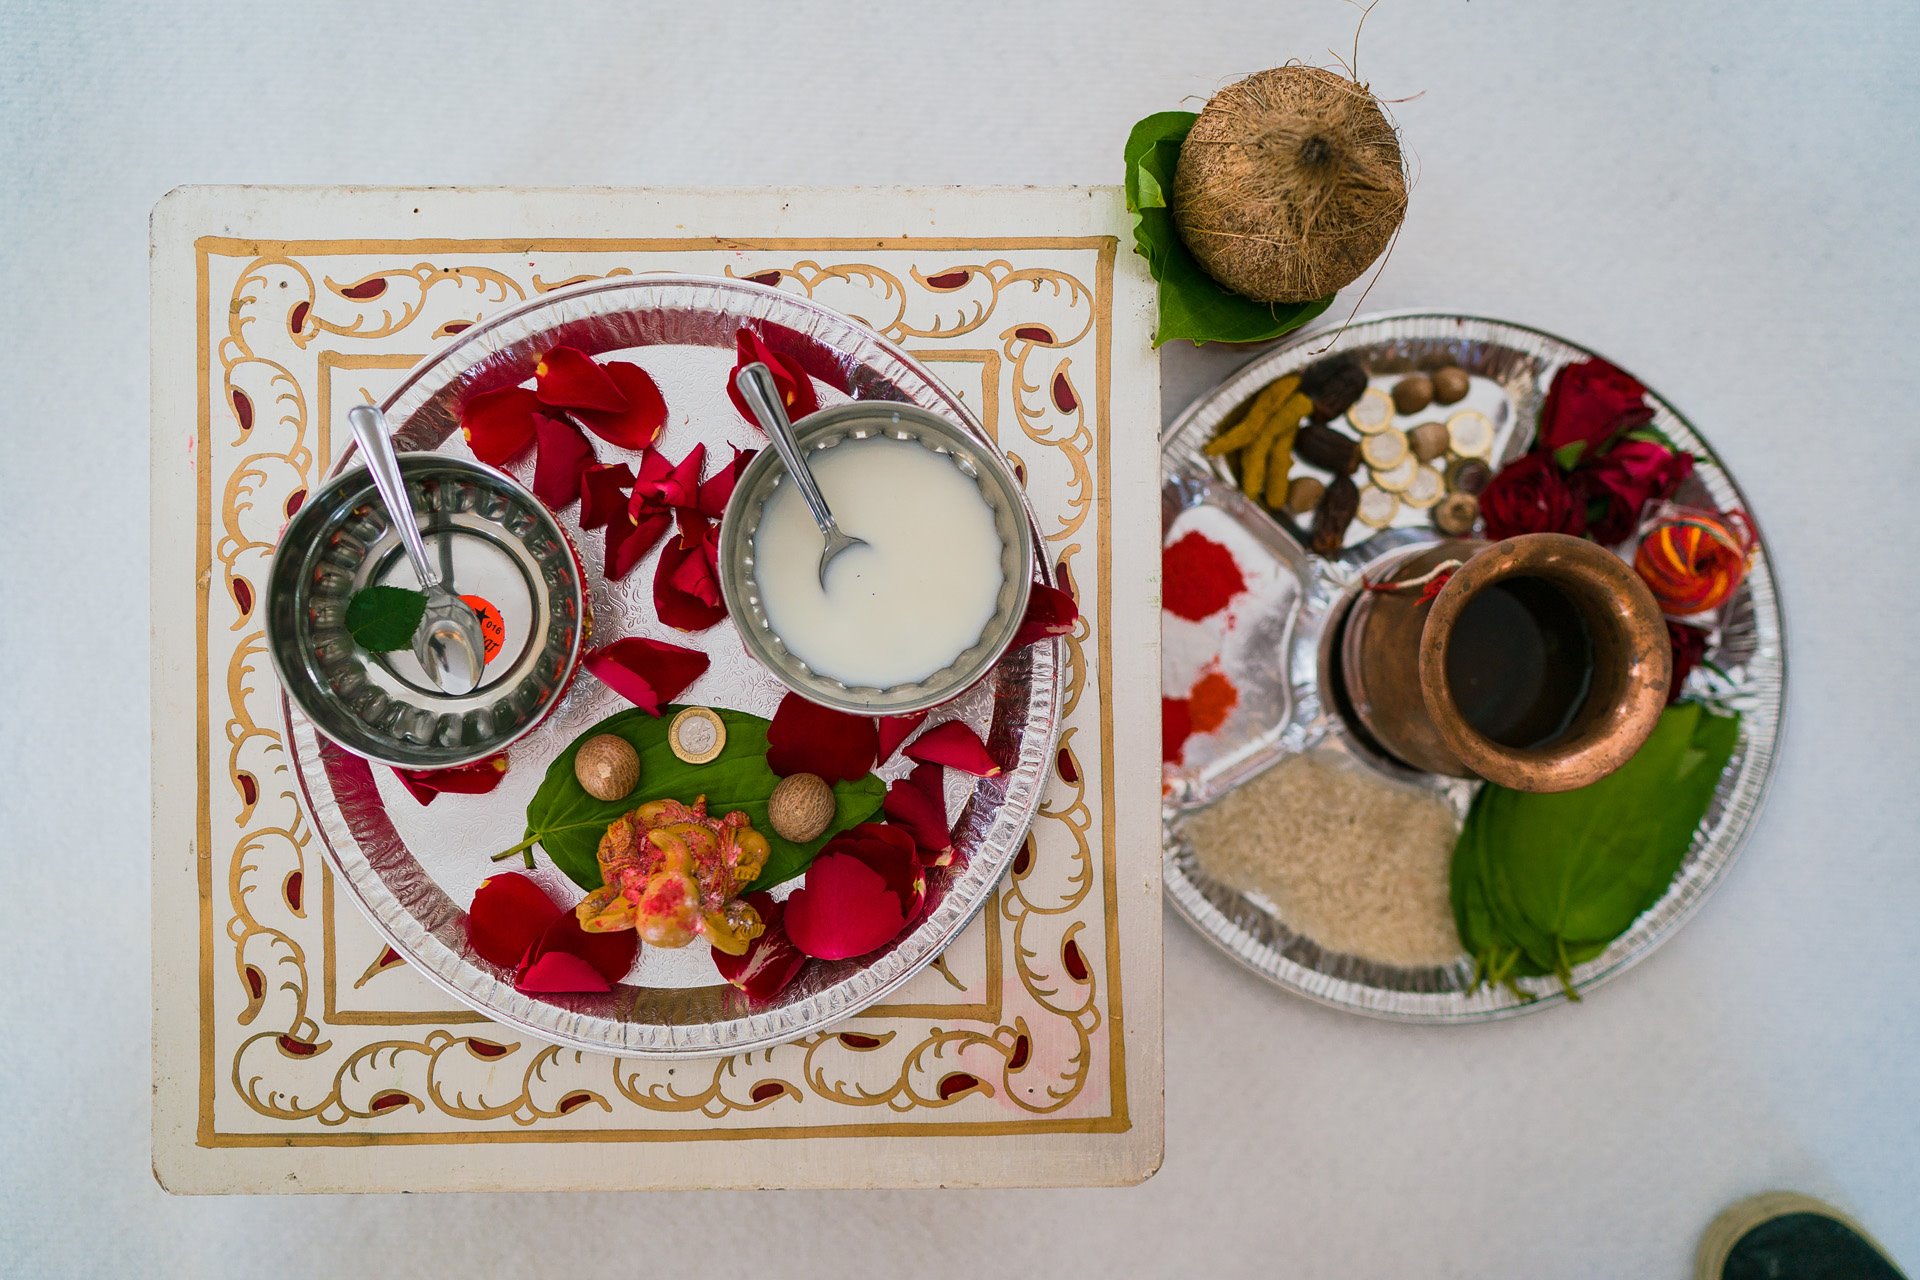 The most beautiful wedding food is Indian